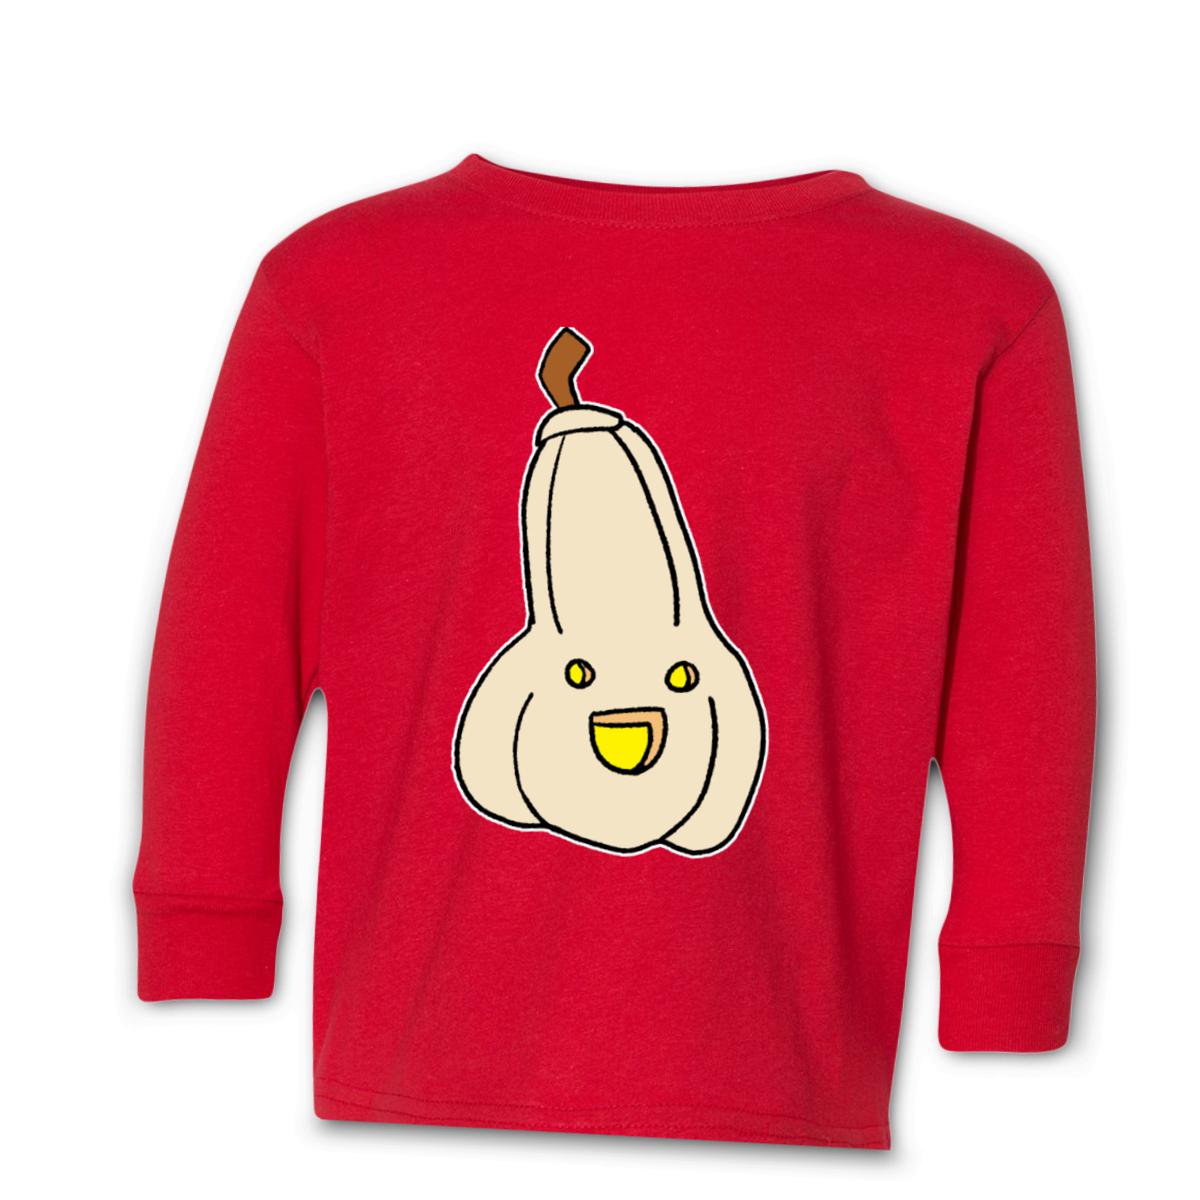 The New Guy Toddler Long Sleeve Tee 4T red